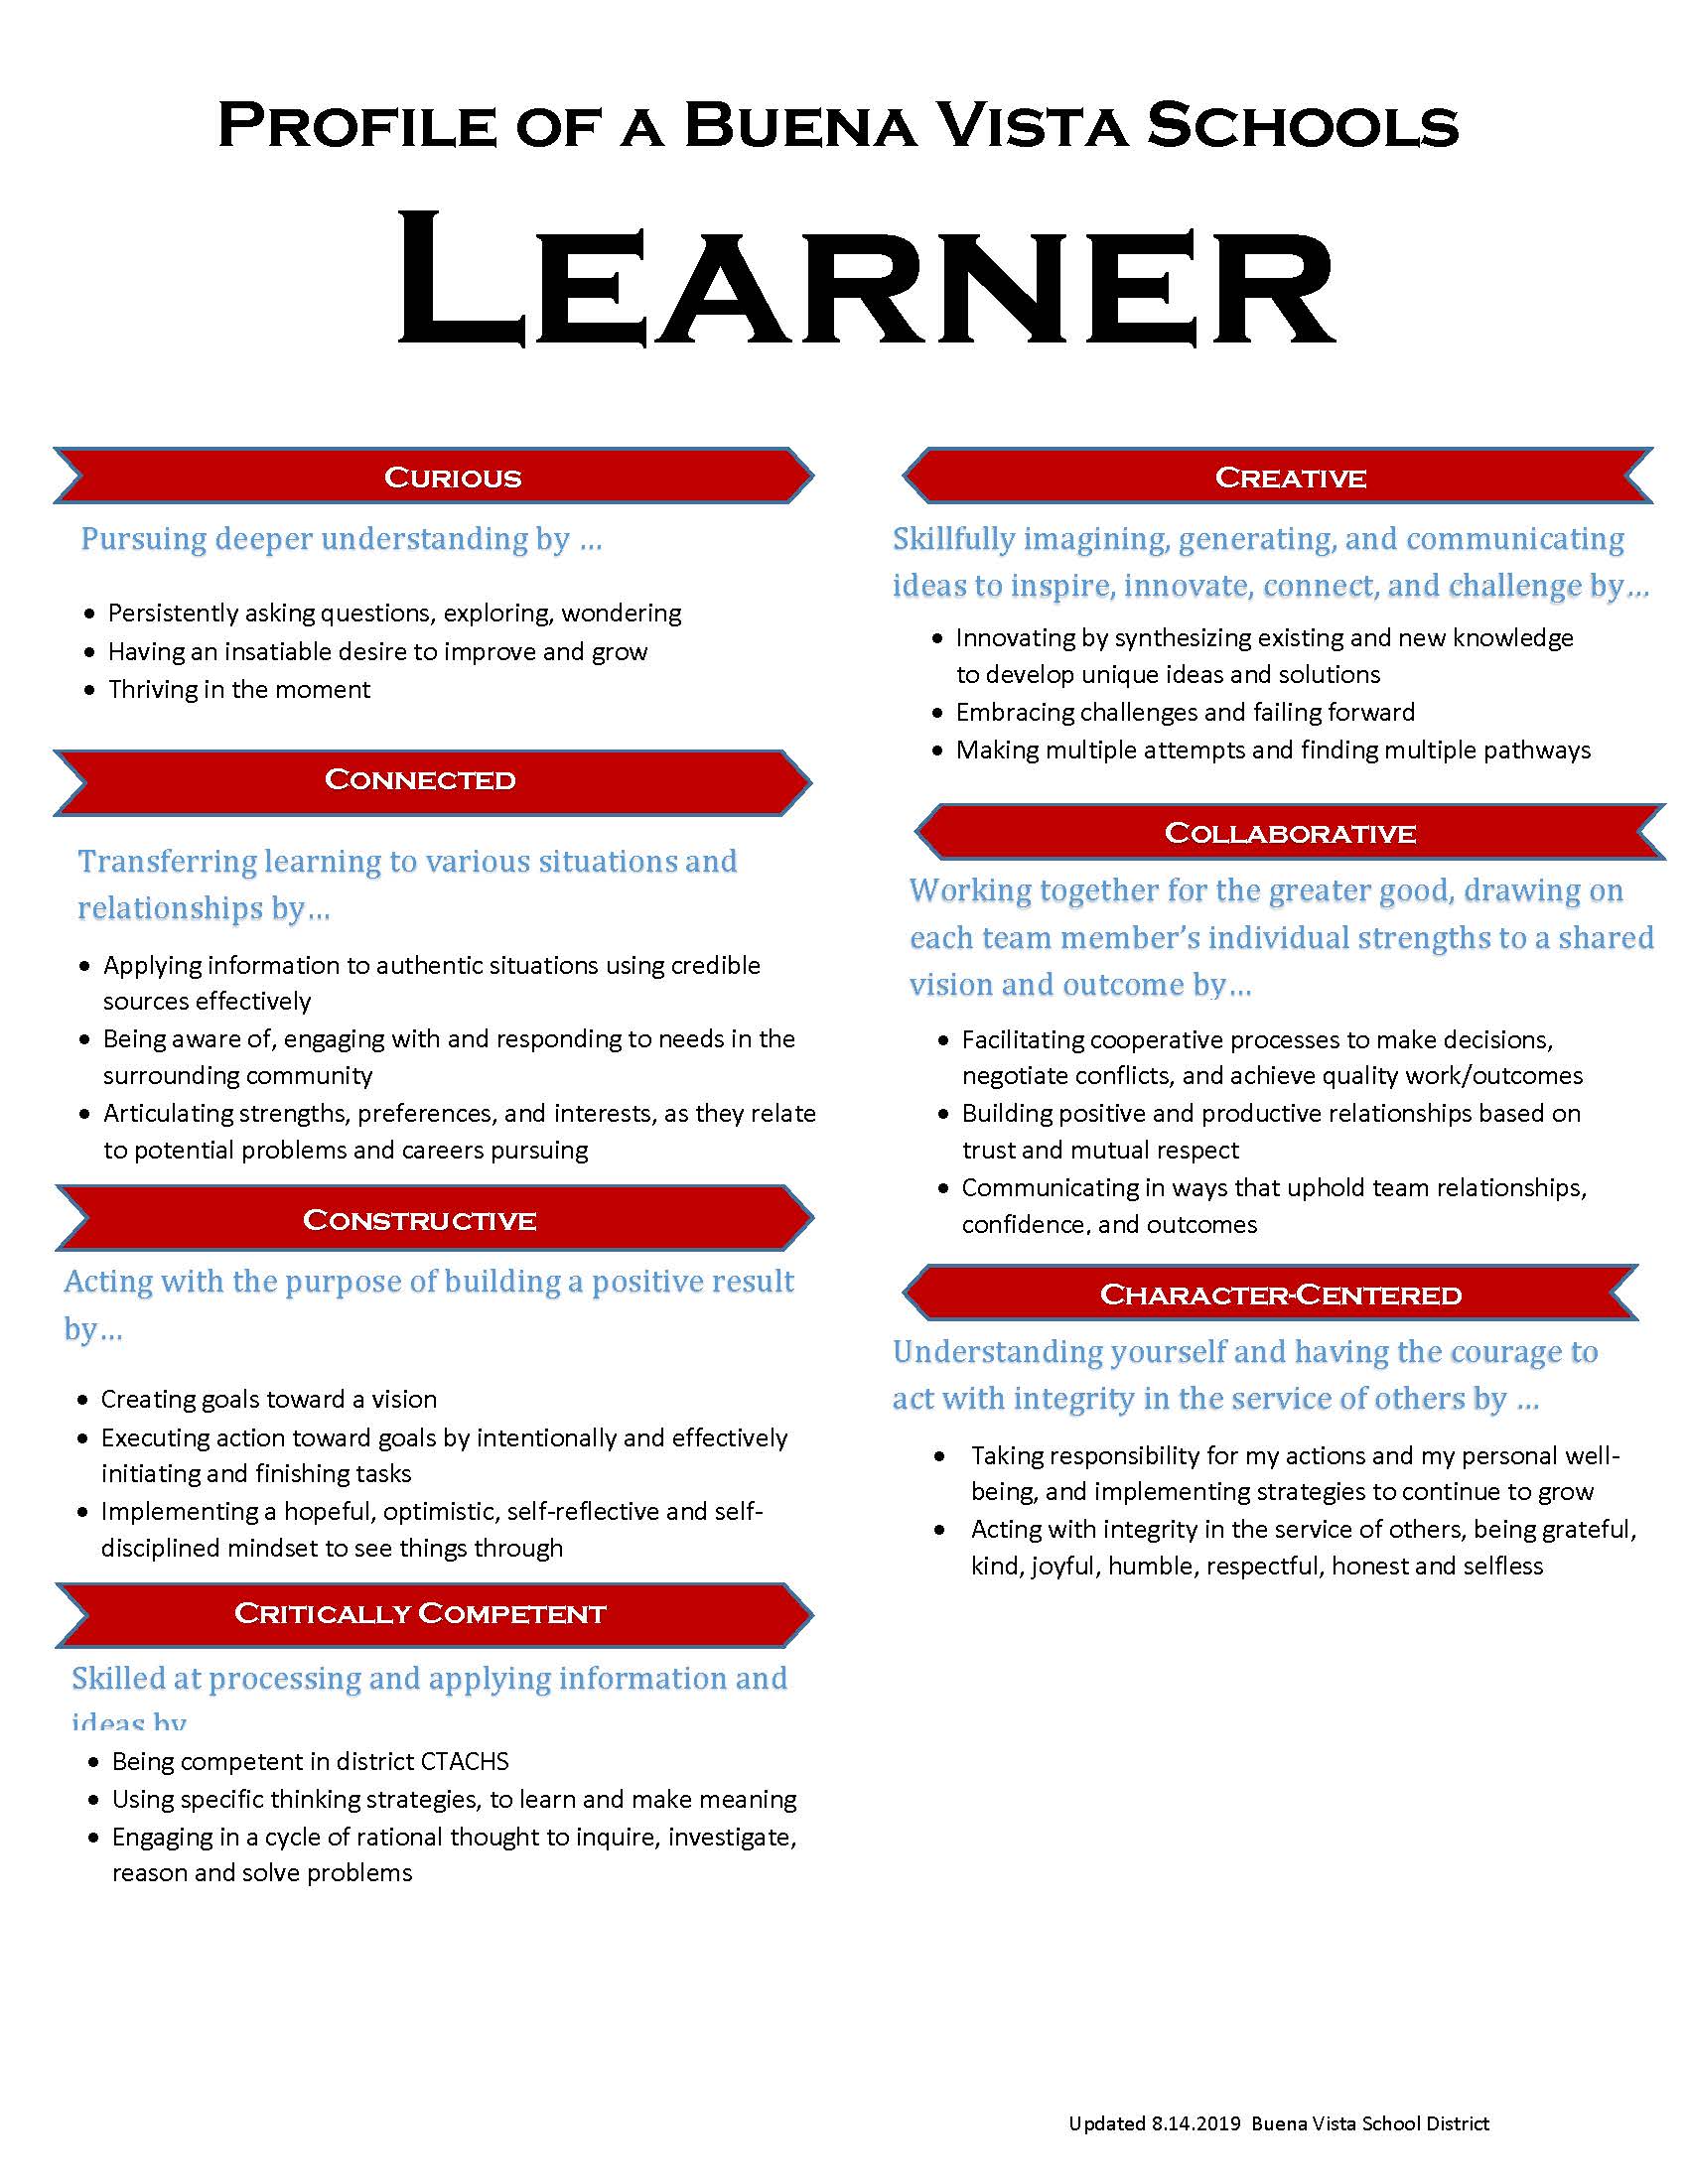 Profile of a Learner